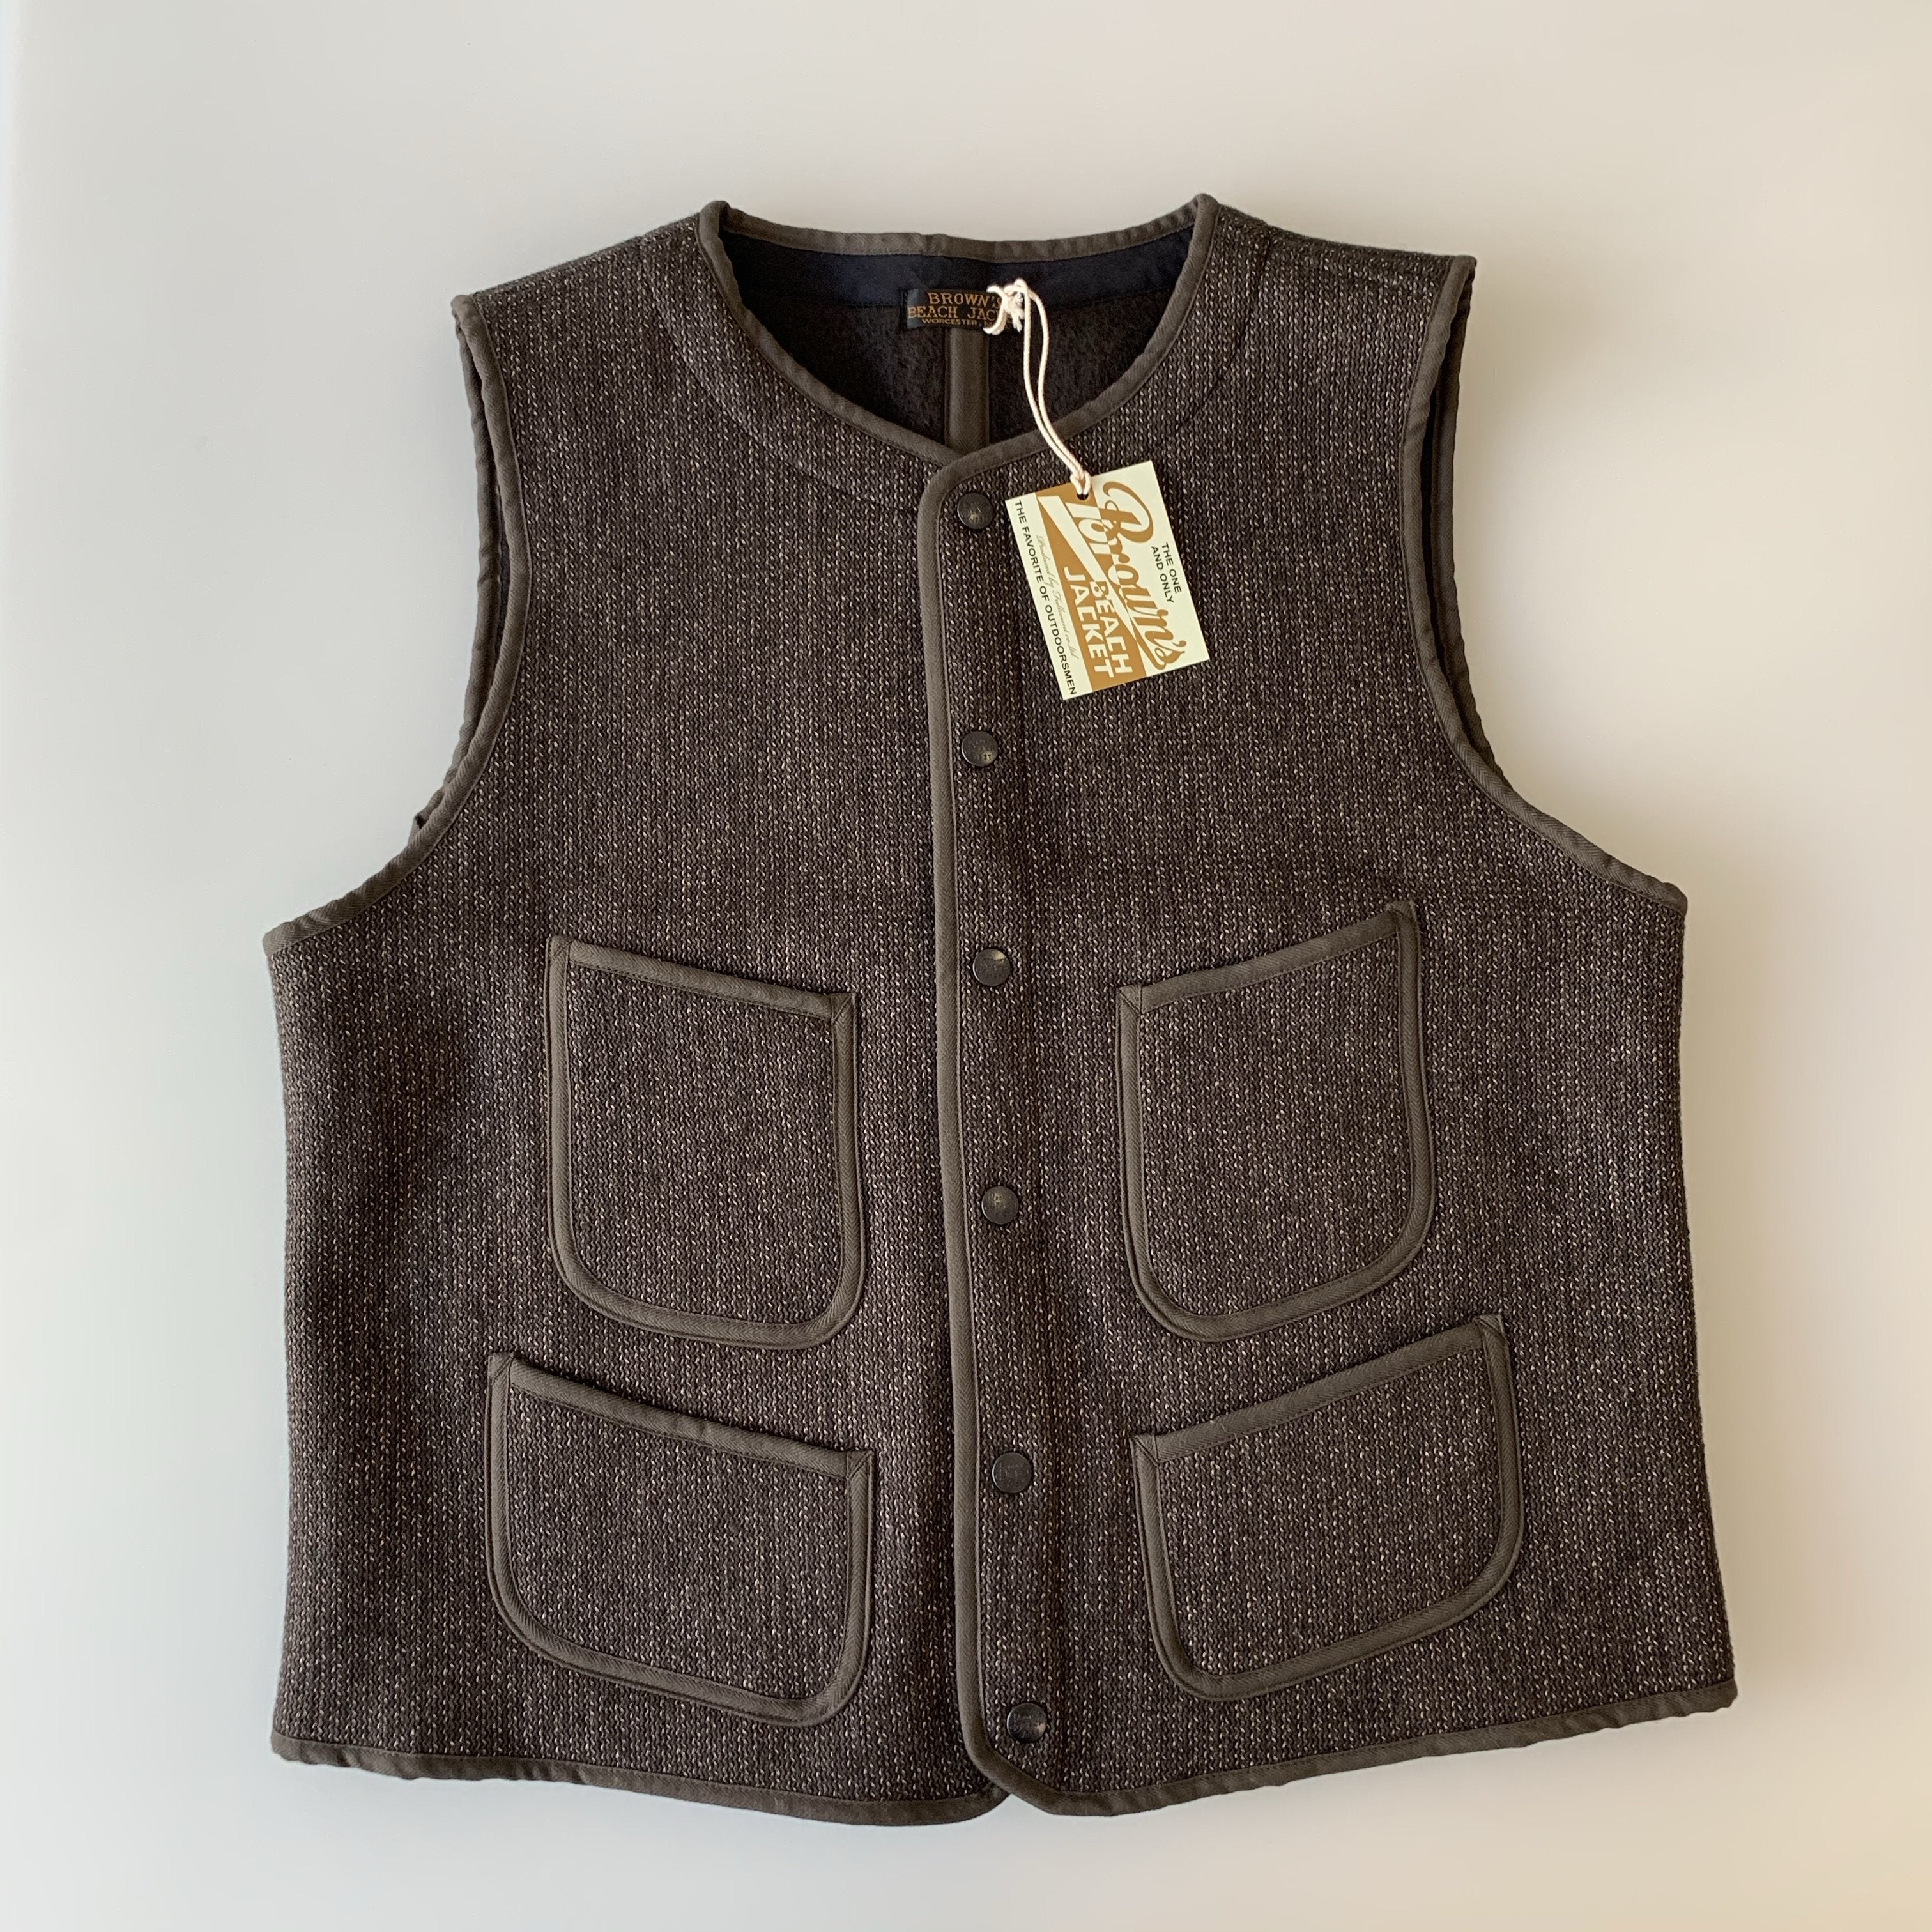 Brown's Beach Early Vest in Oxford Grey